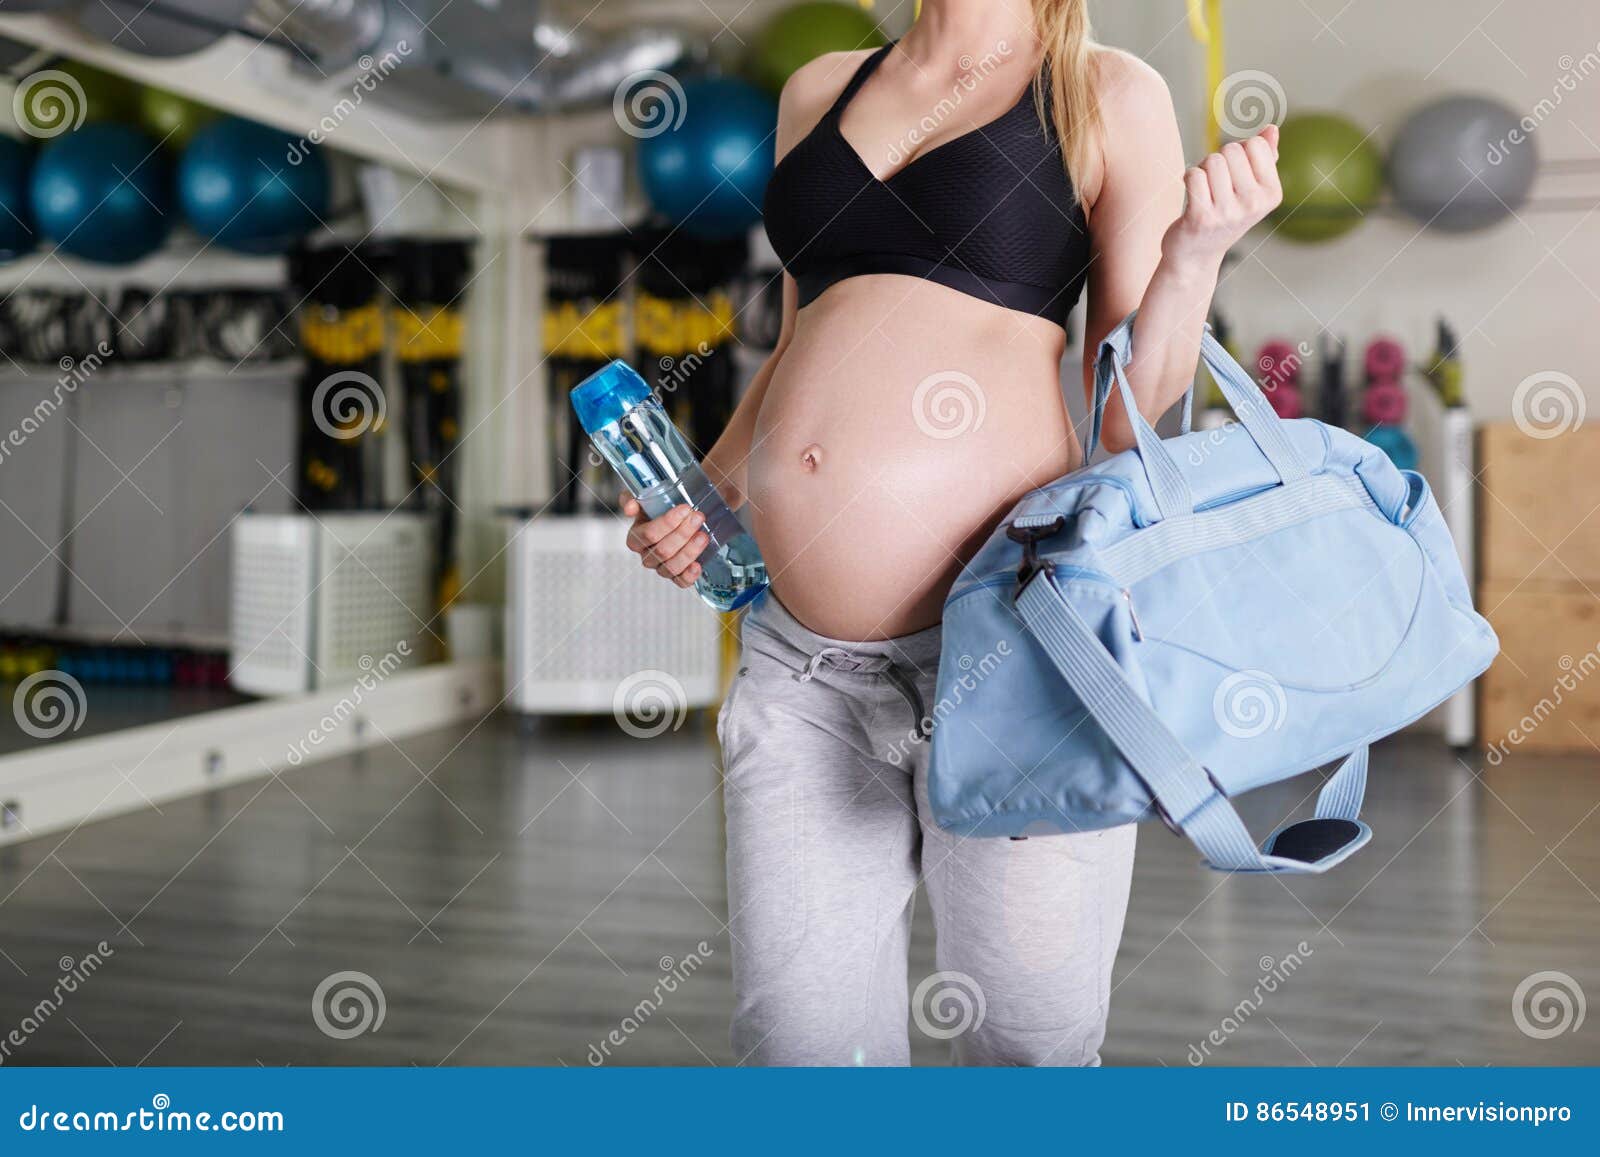 pregnant woman at the gym holding sport bag and bidon